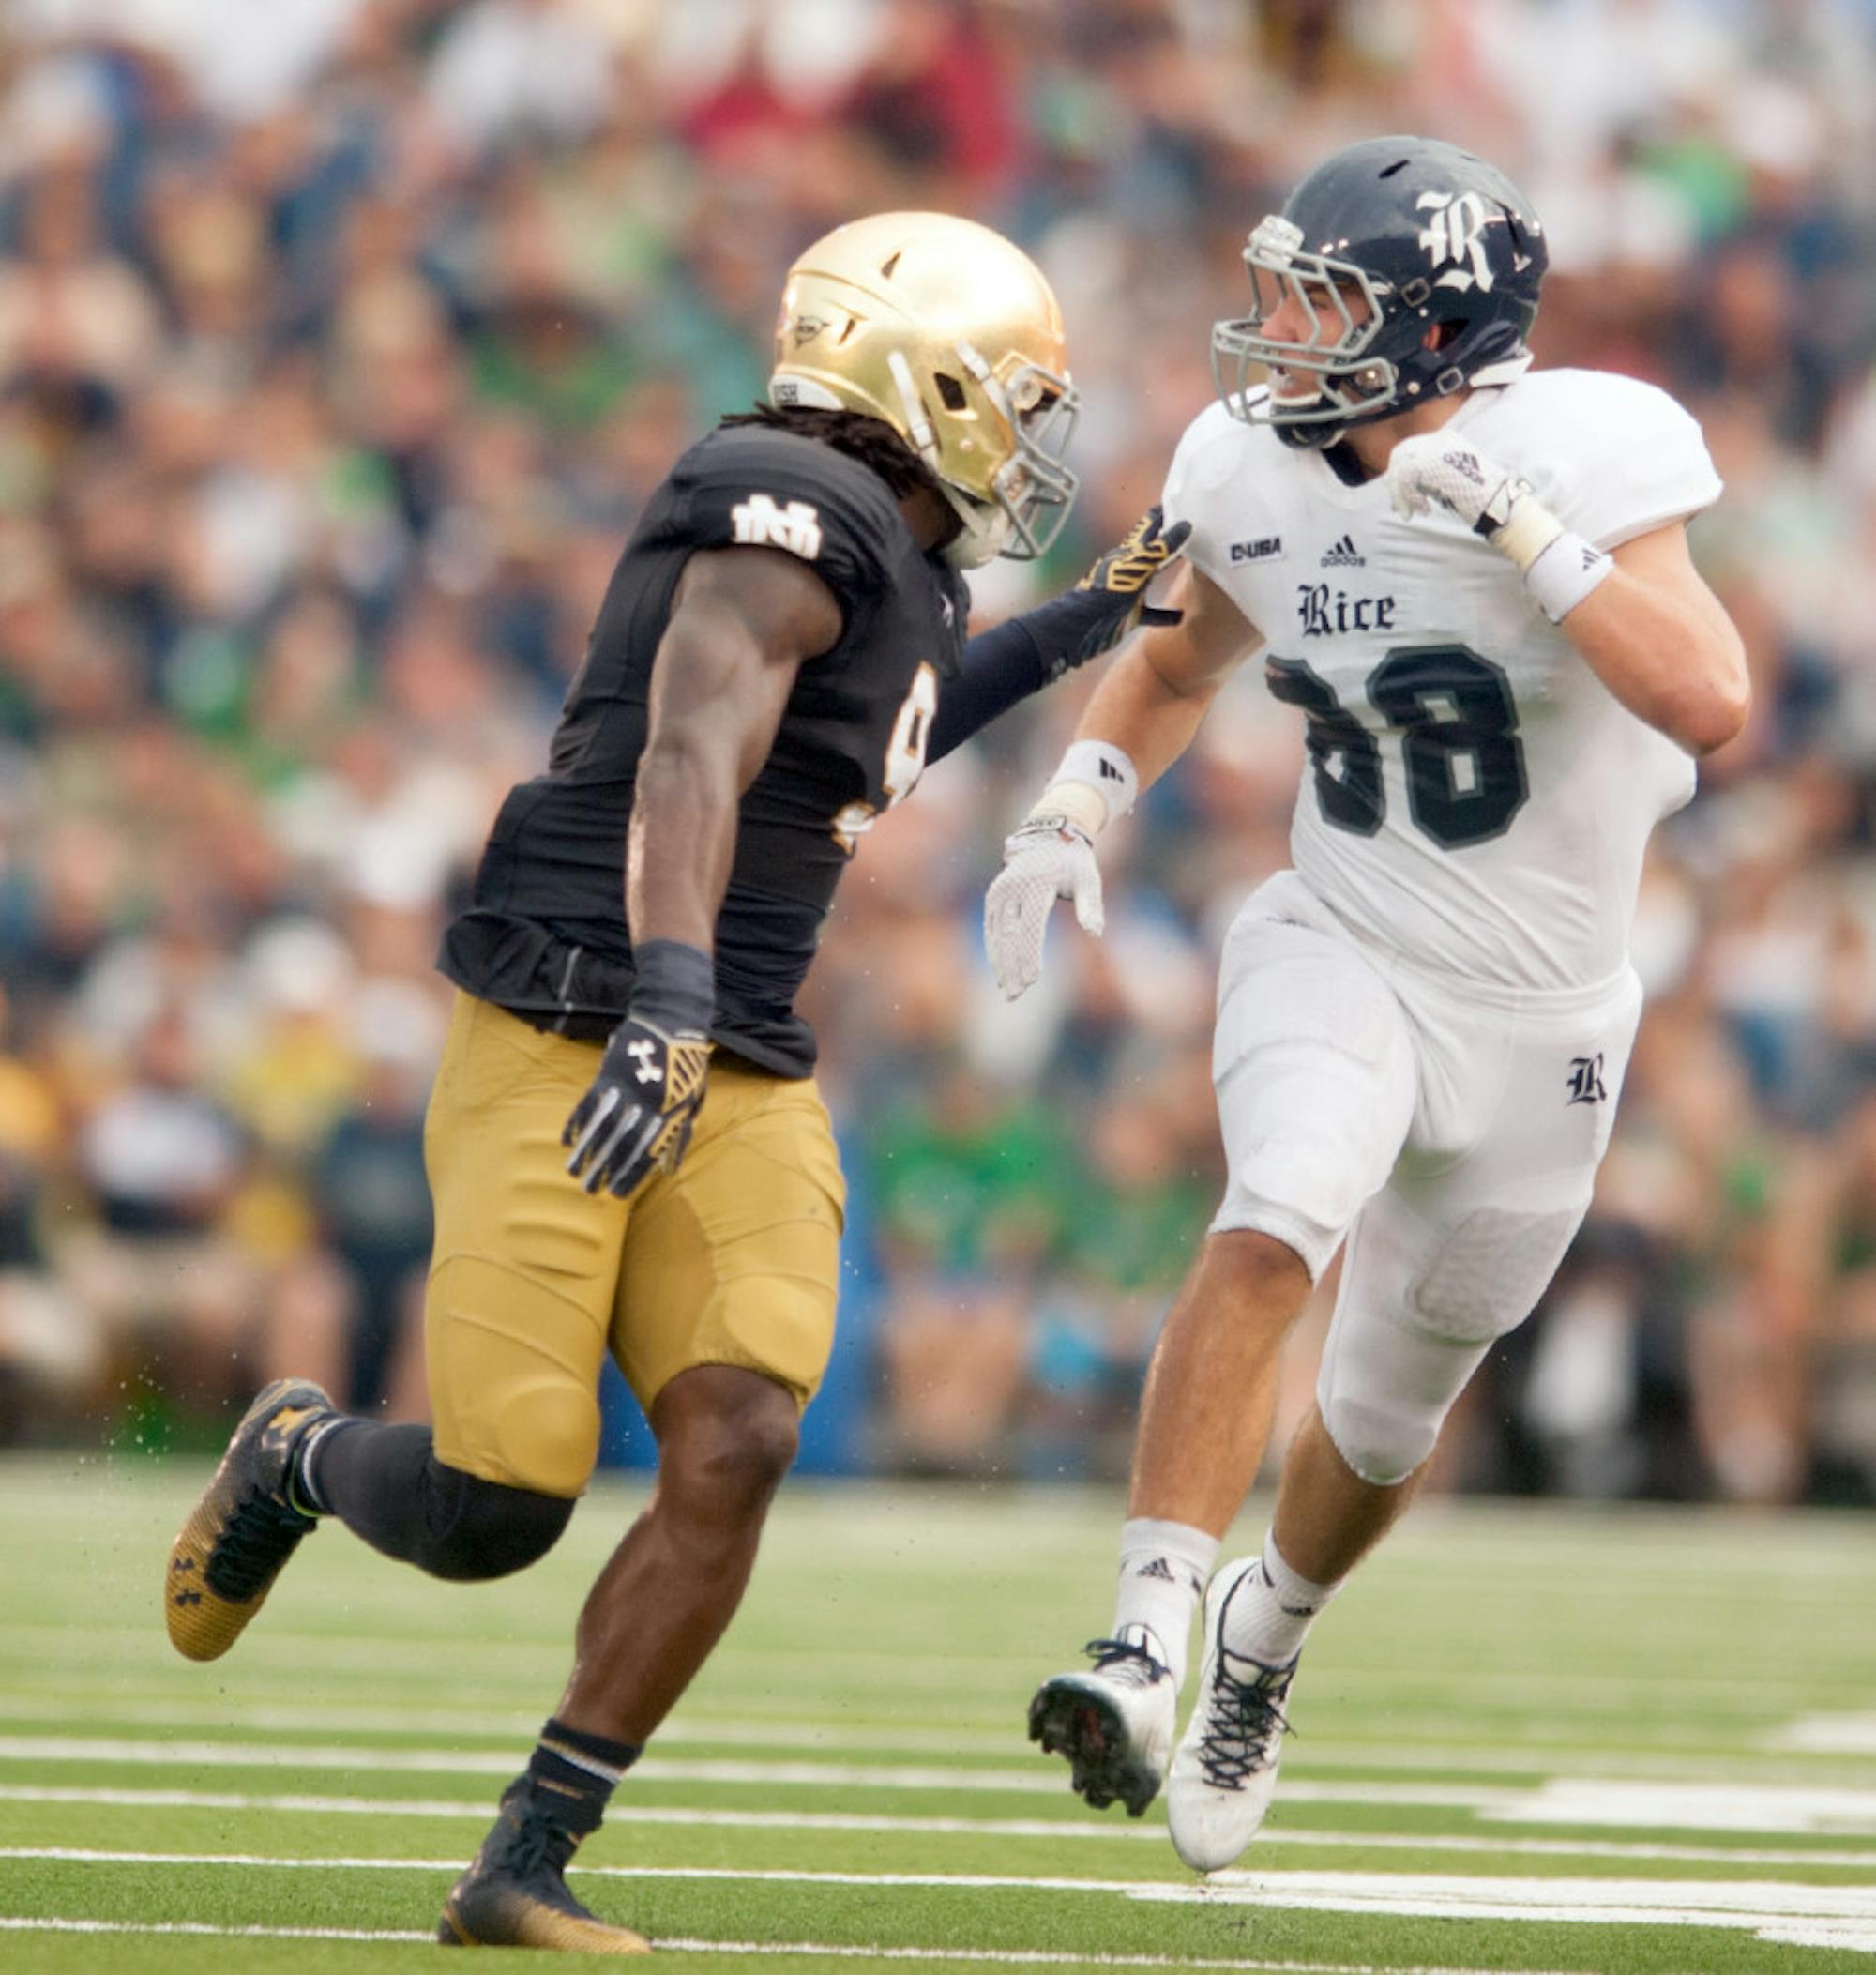 Irish sophomore linebacker Jaylon Smith, pictured here against Rice, said Notre Dame will rely on its “next-man-in” philosophy after senior linebacker Joe Schmidt suffered a season-ending ankle injury.